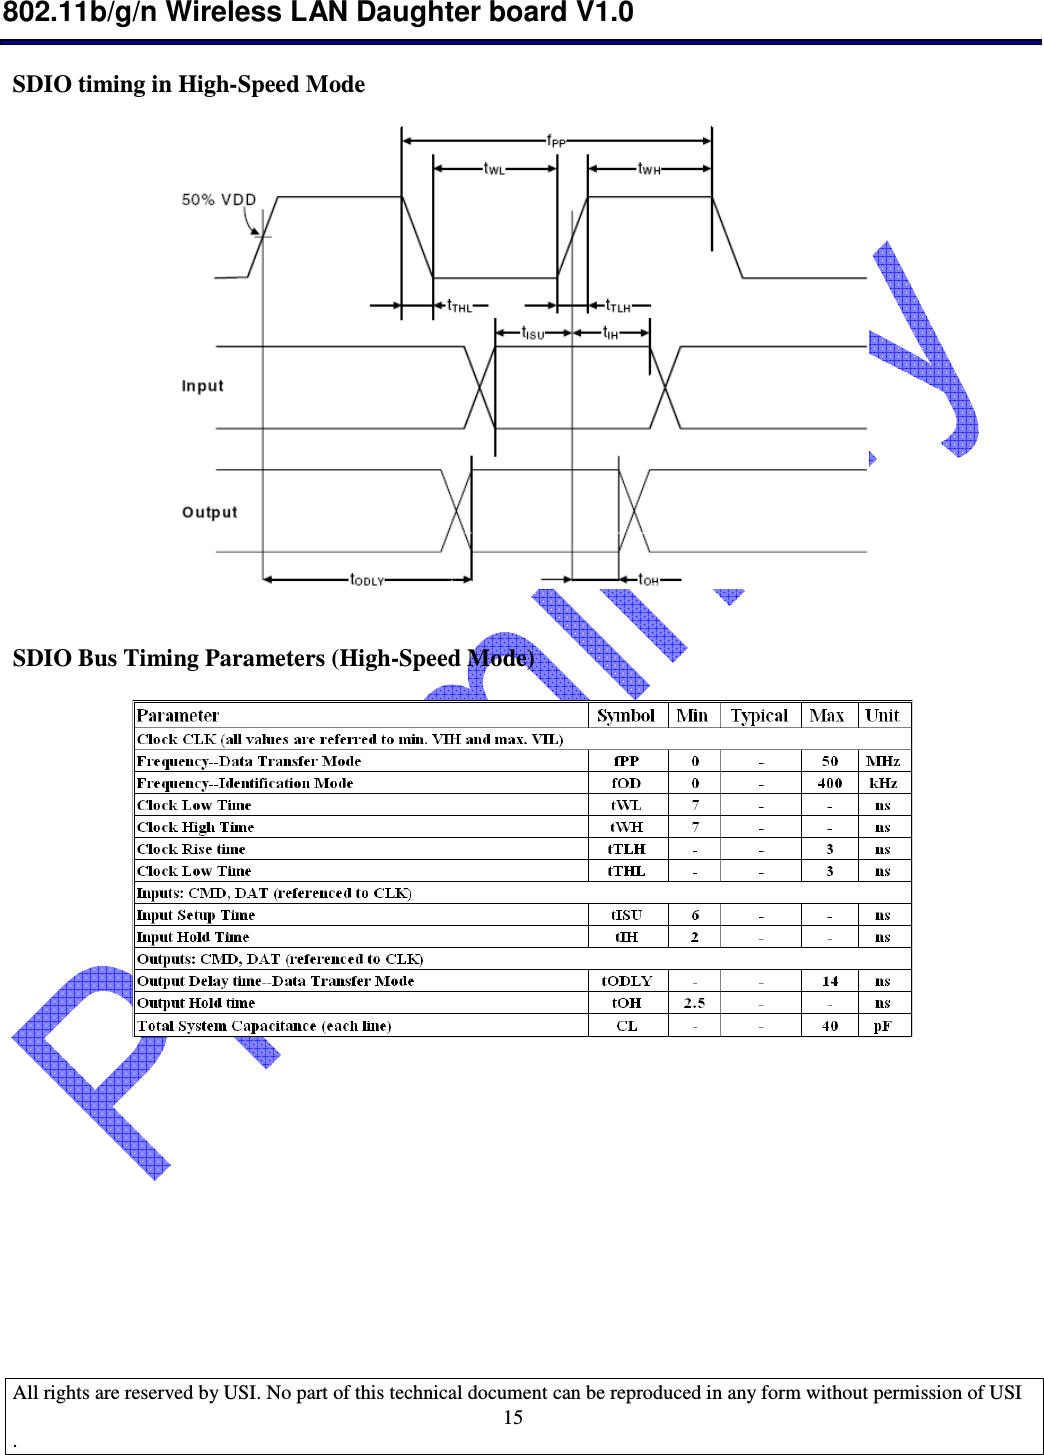  802.11b/g/n Wireless LAN Daughter board V1.0  All rights are reserved by USI. No part of this technical document can be reproduced in any form without permission of USI .                                    15SDIO timing in High-Speed Mode     SDIO Bus Timing Parameters (High-Speed Mode)              